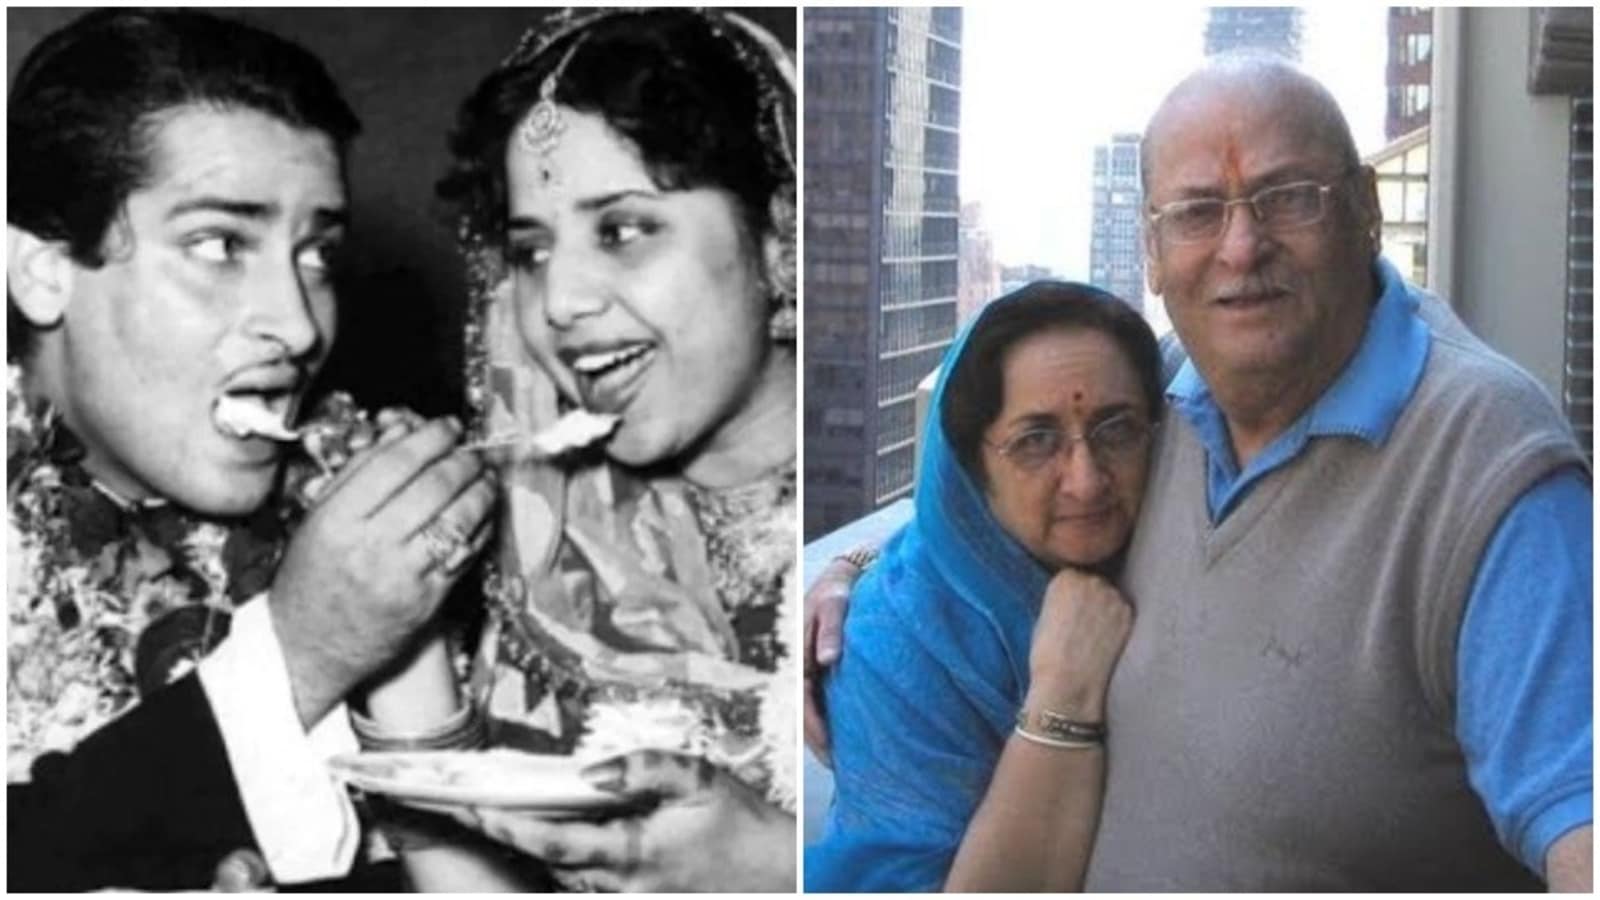 Shammi Kapoor’s son recalls actor did not tell him he was marrying Neila Devi after Geeta Bali’s death: ‘Ma mil gayi’